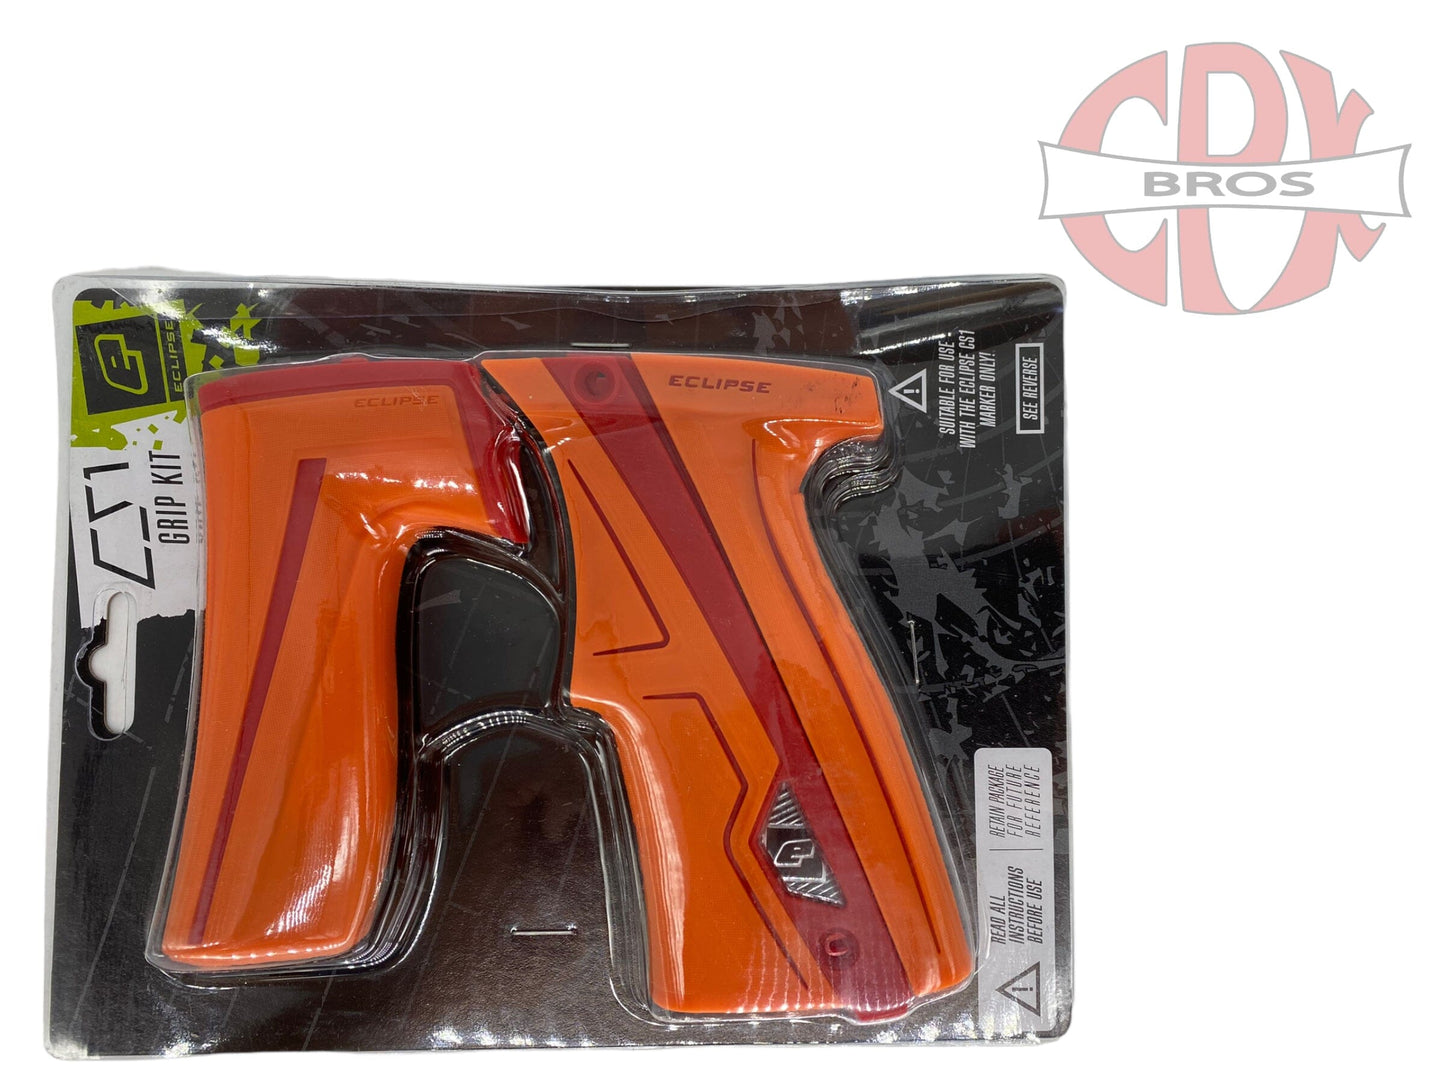 Used New Orange/Red Planet Eclipse Cs1/Cs1.5 Paintball Grip Kit Paintball Gun from CPXBrosPaintball Buy/Sell/Trade Paintball Markers, Paintball Hoppers, Paintball Masks, and Hormesis Headbands